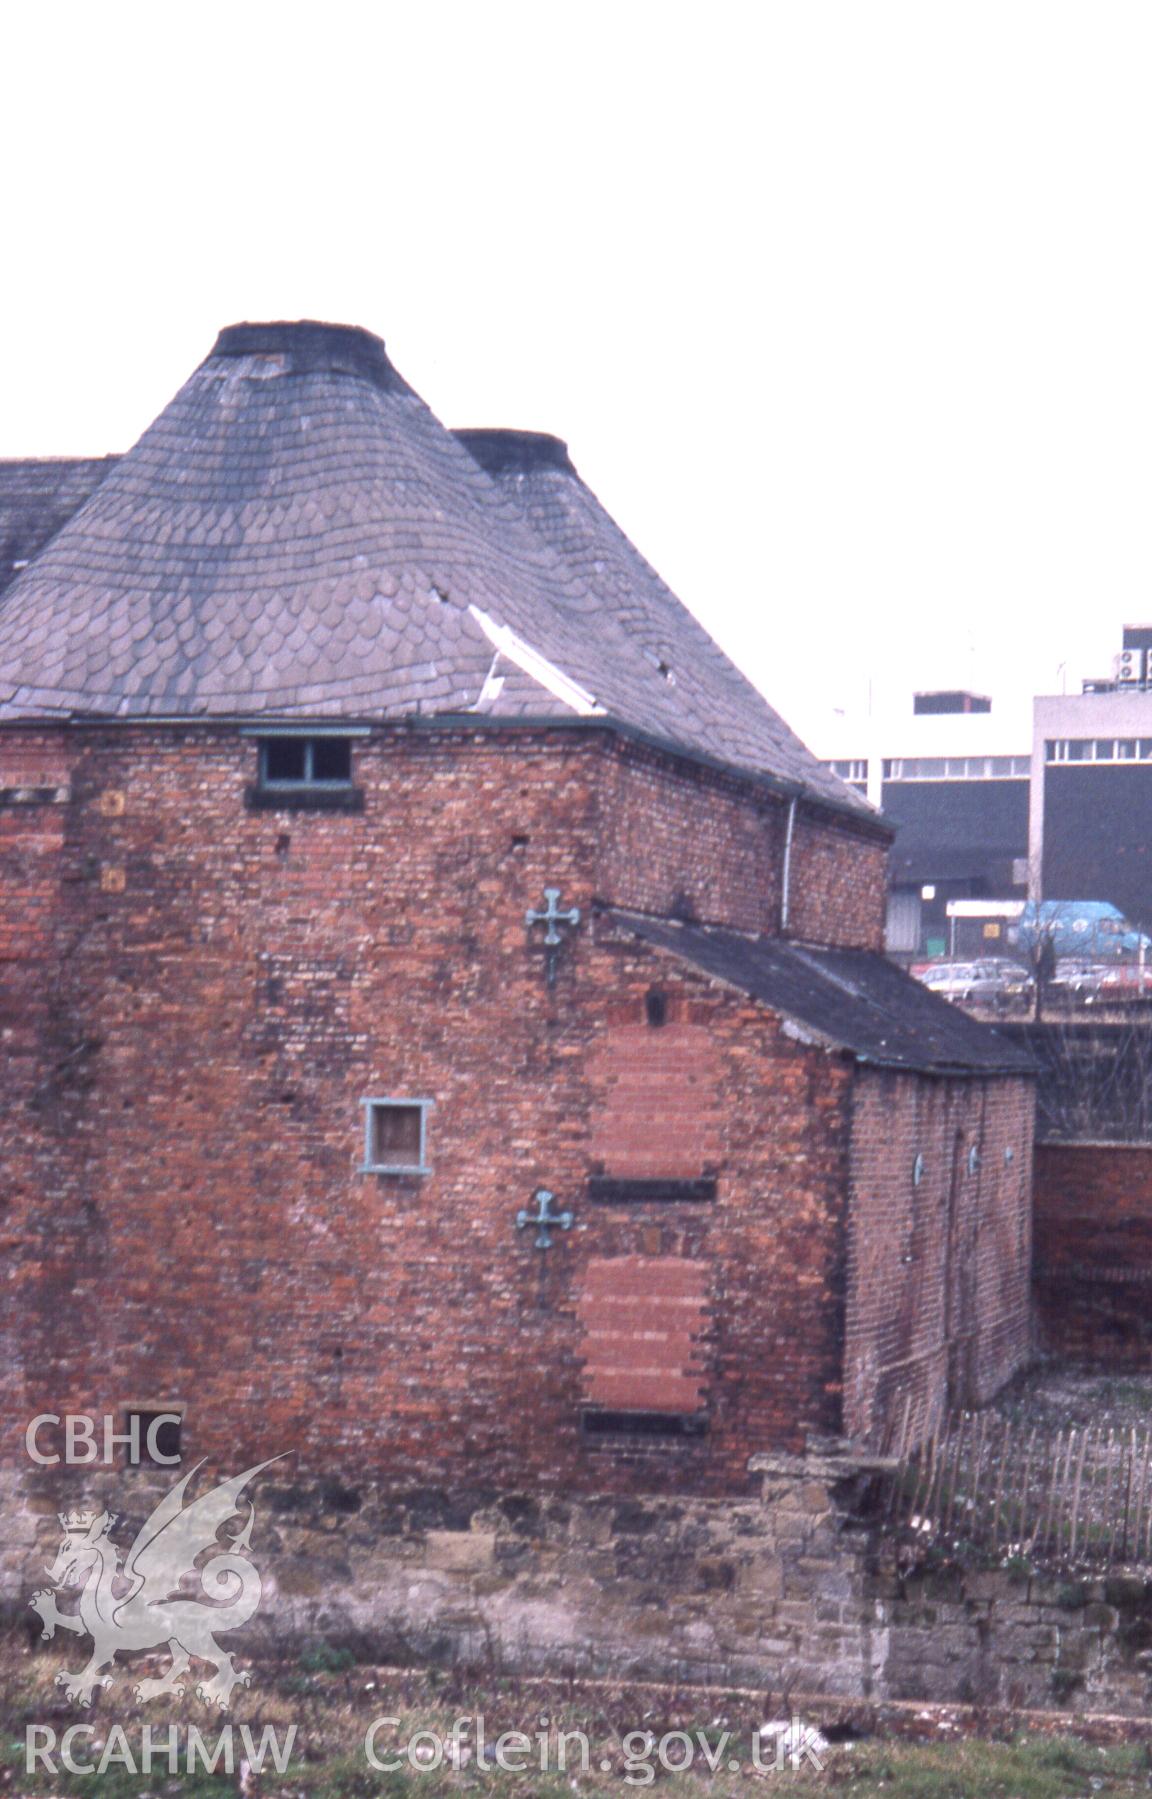 Colour digital photograph of Island Green Malthouse and Brewery, Wrexham, by Stephen Hughes, 14/03/1996.